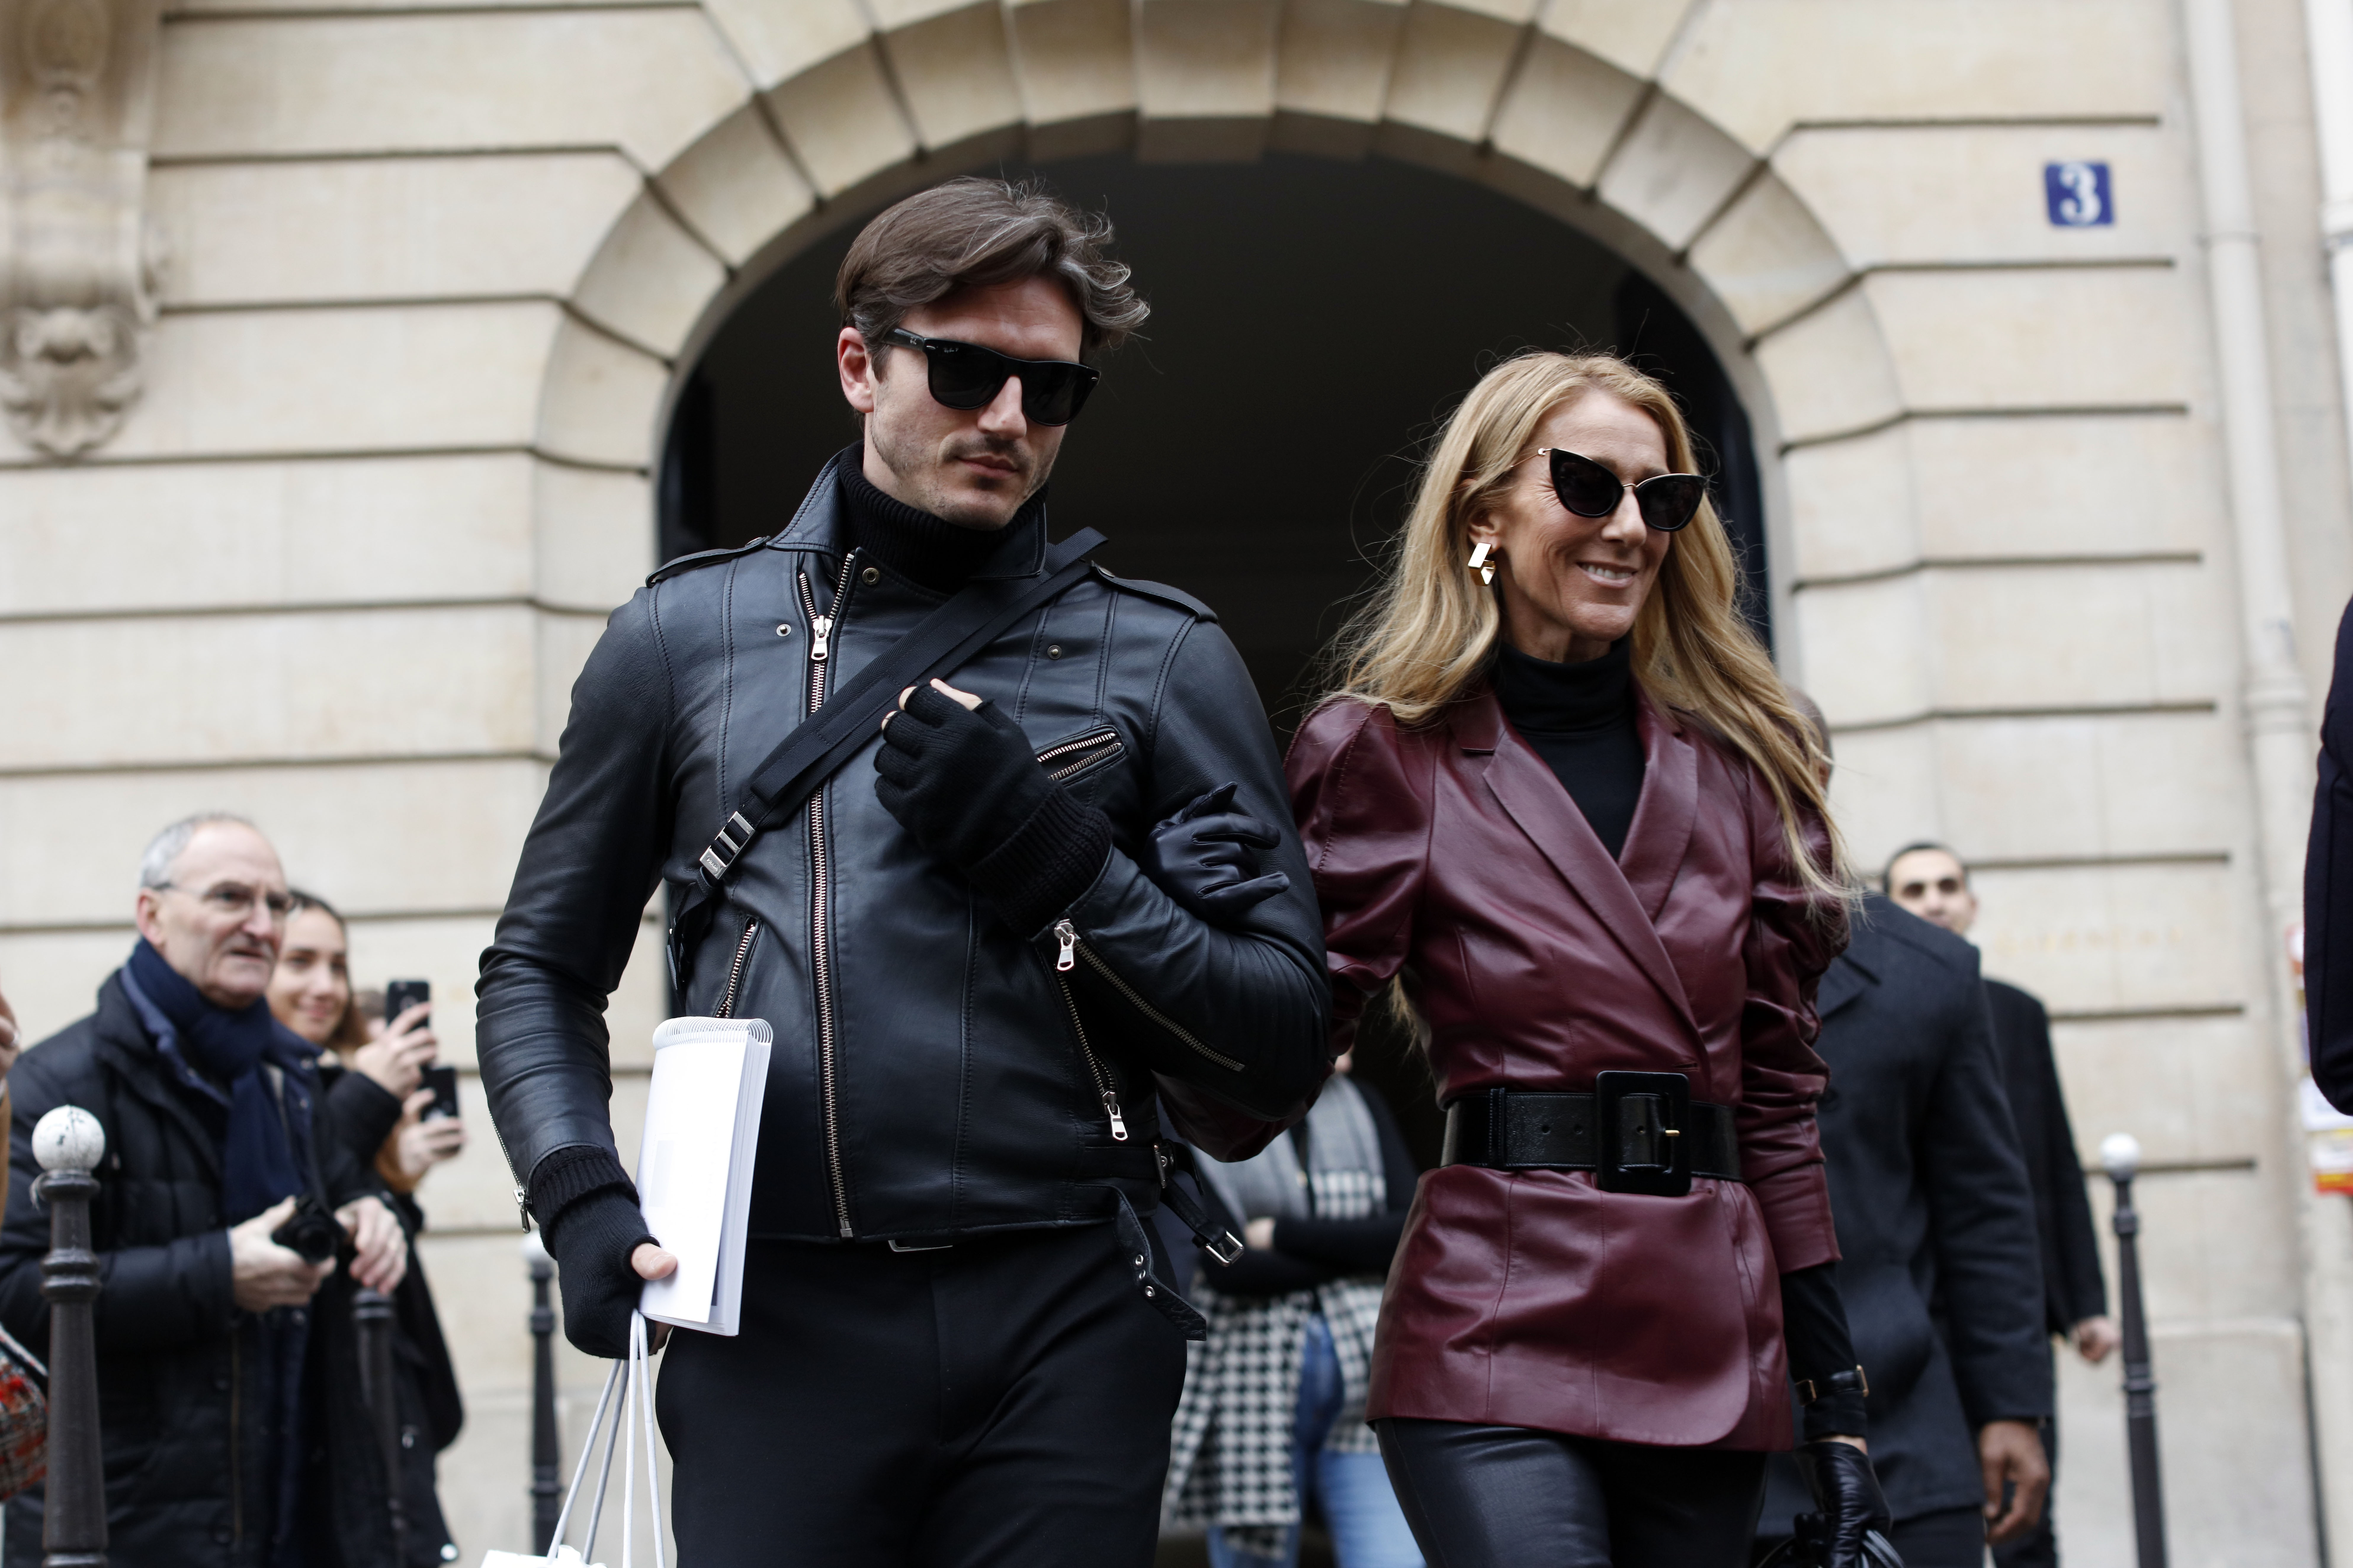 Celine Dion and Pepe Munoz seen leaving the GIVENCHY office building on Avenue George V on January 24, 2019 in Paris, France. | Source: Getty Images